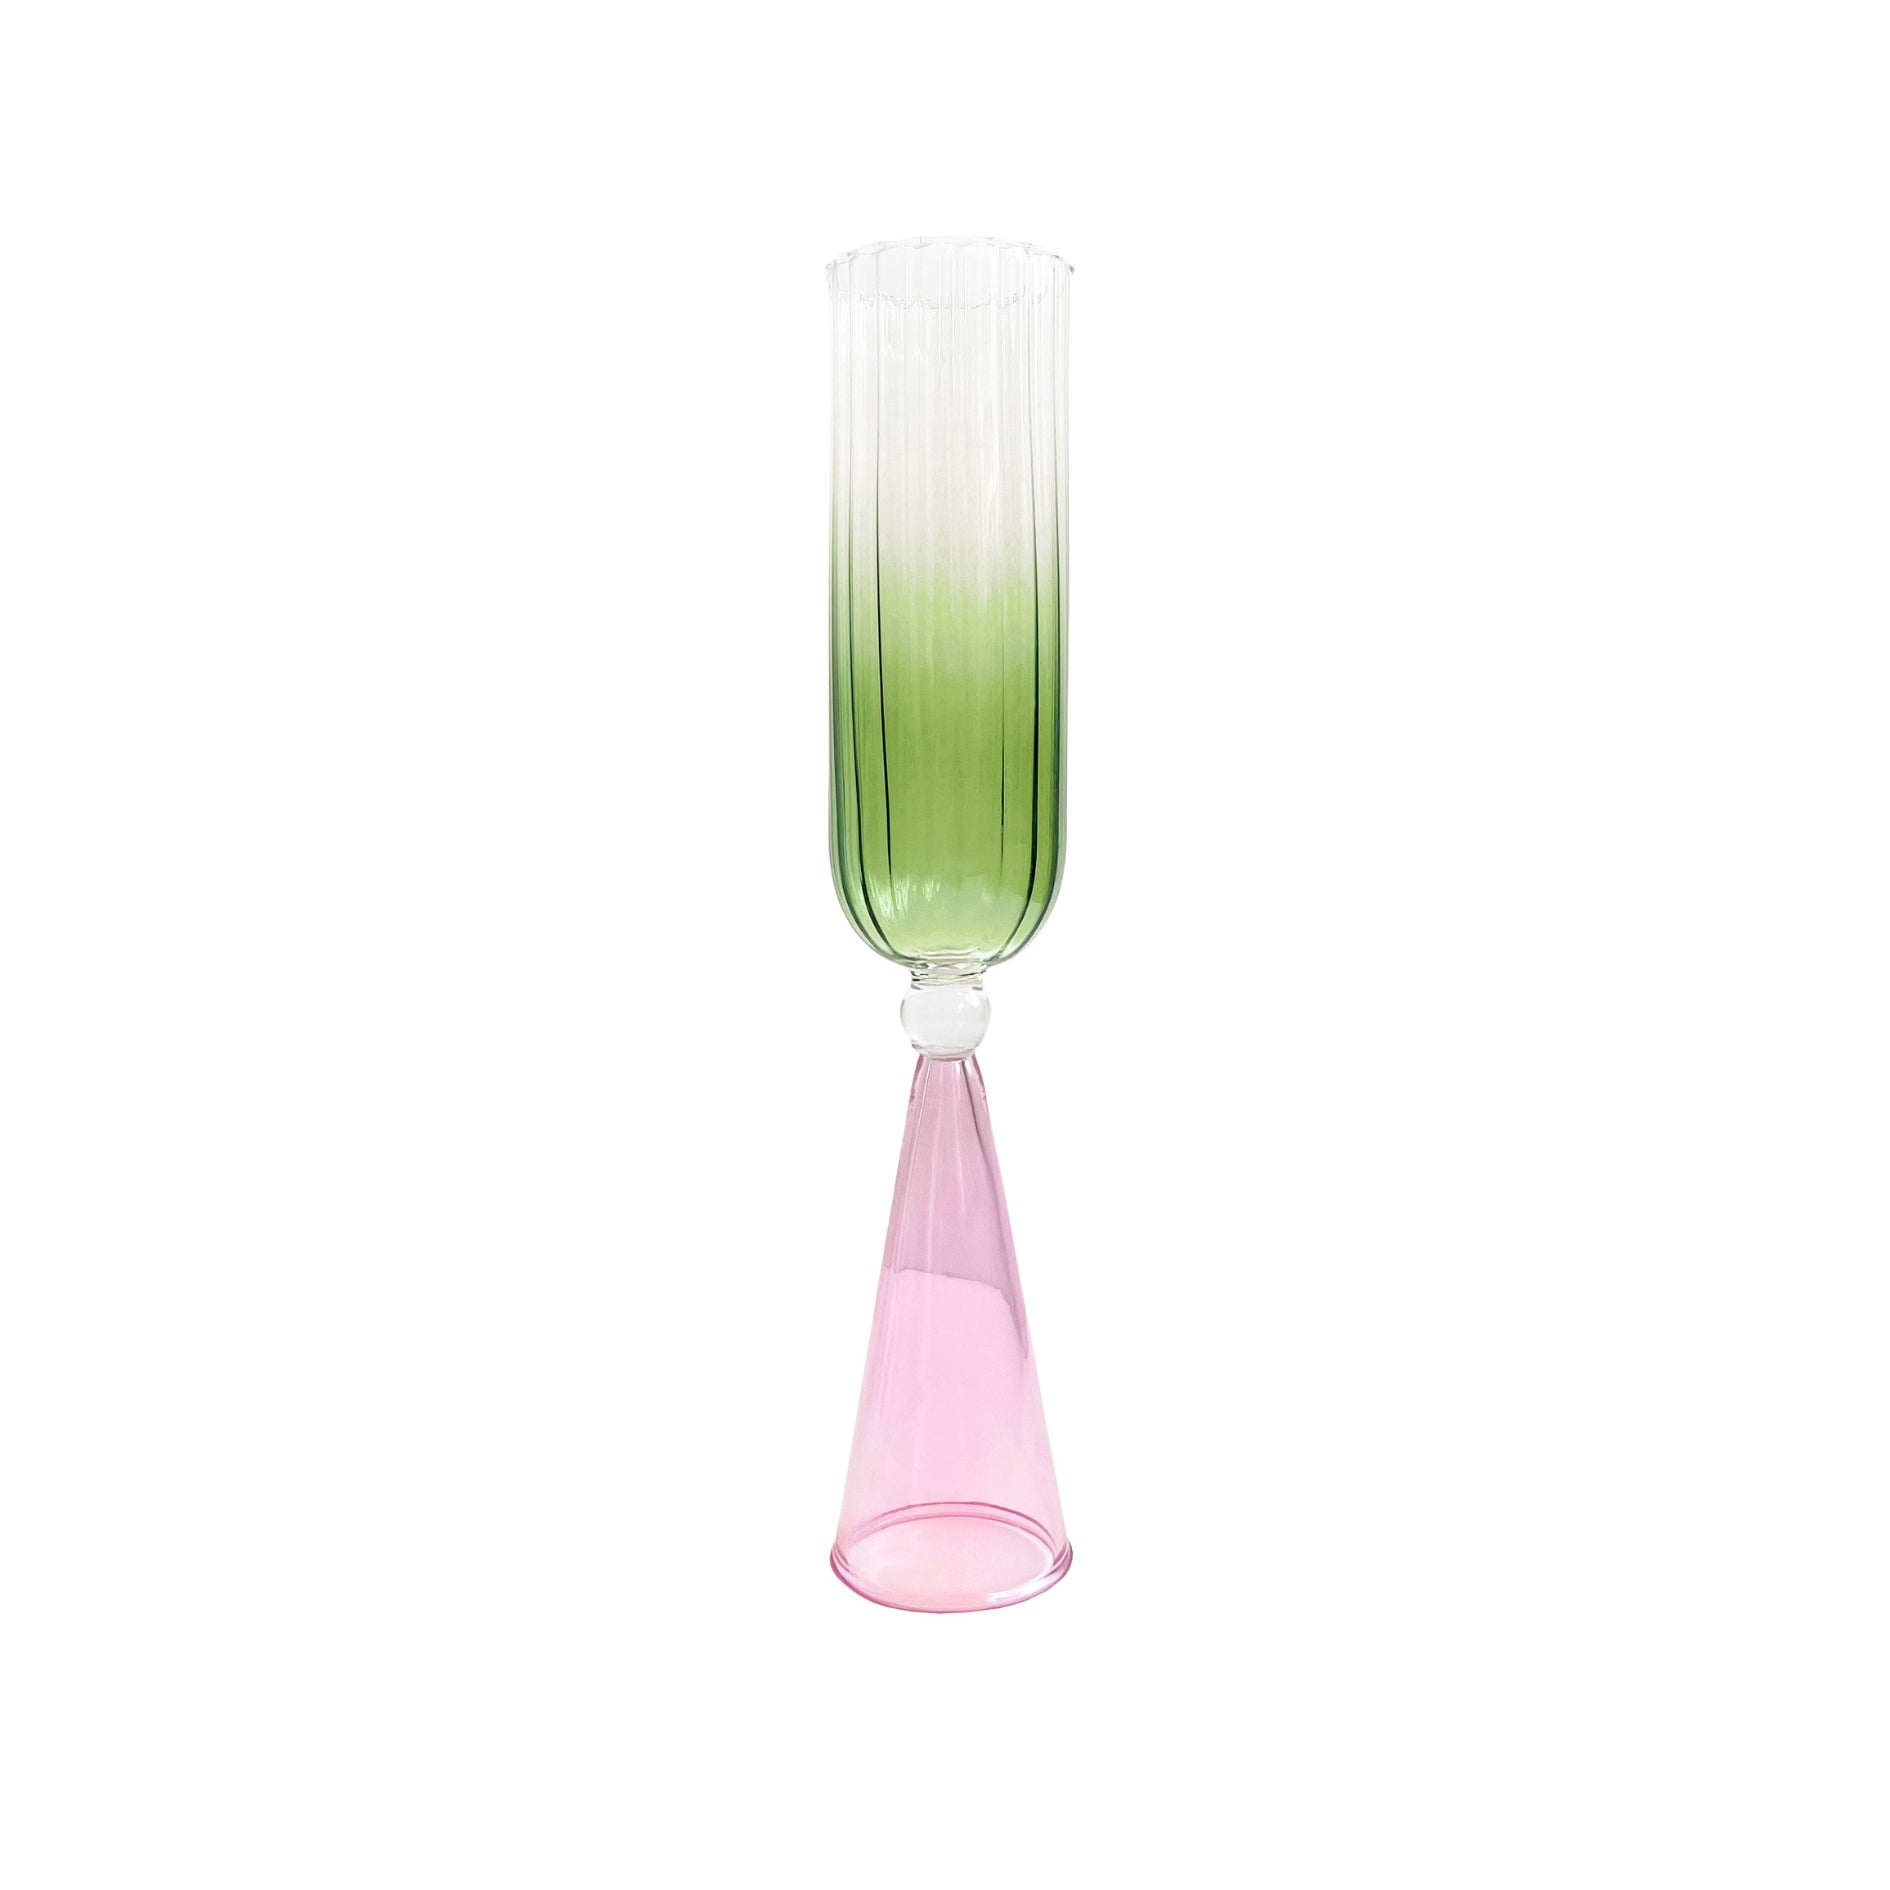 Gatsby Champagne Flute [Set of 2]